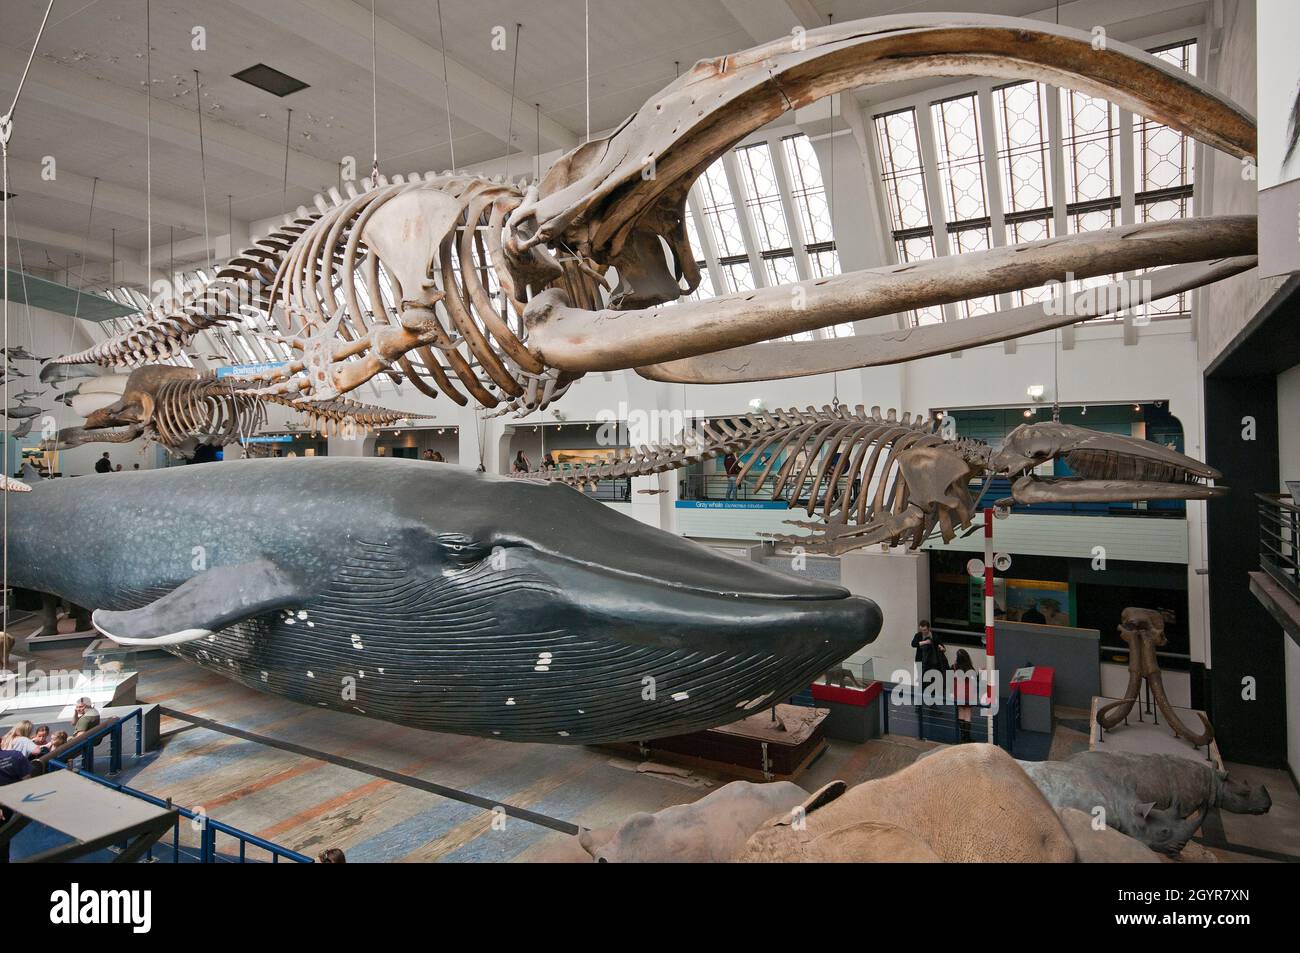 Bowhead whale skeleton (Balaena mysticetus) and blue whale model (Balaenoptera musculus) in mammals hall of Natural History Museum, London, England Stock Photo